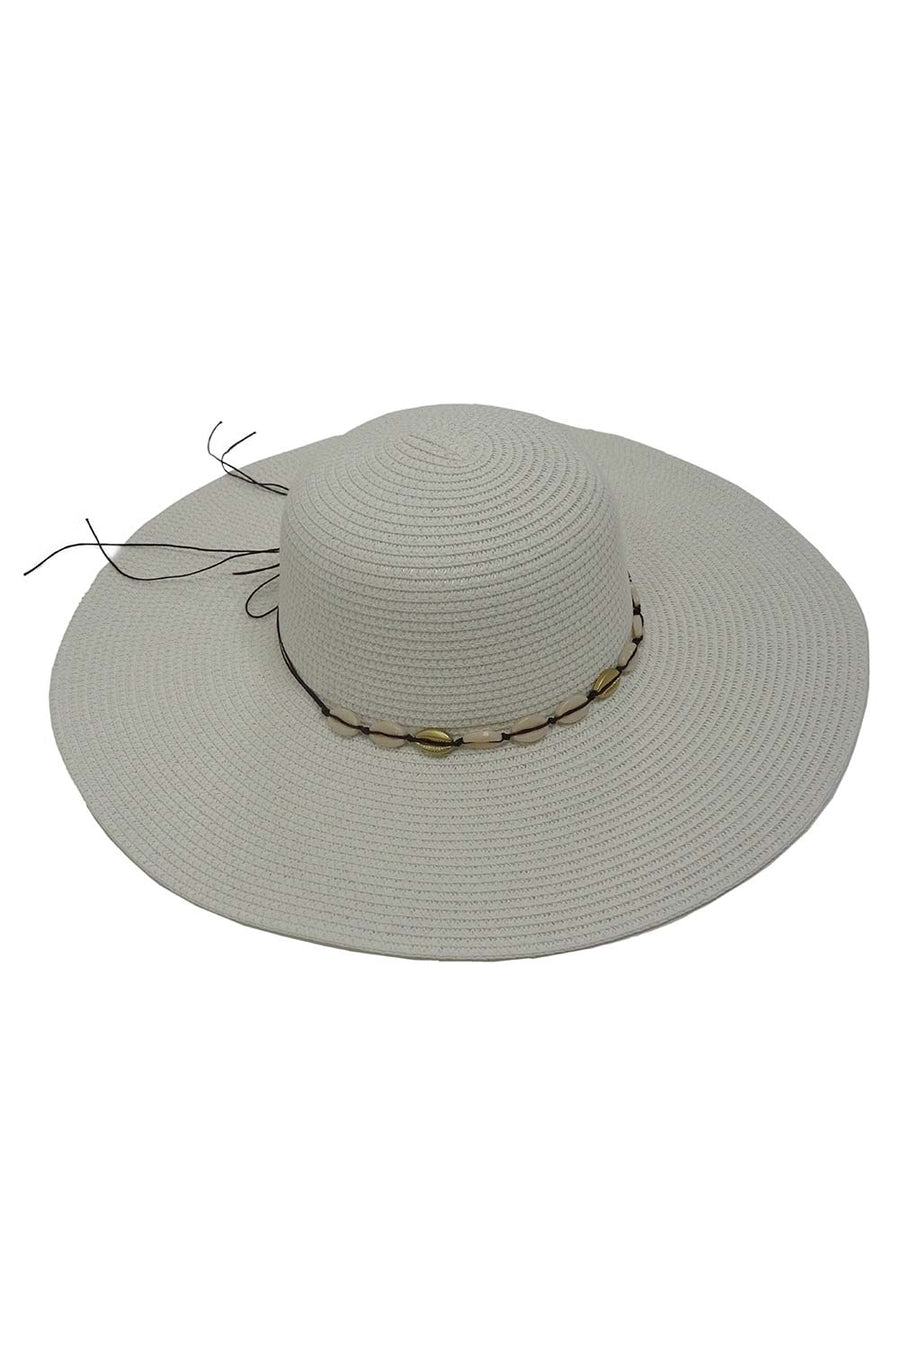 Women’s Floppy Sun Straw Hat with Wide Brim and Seashell Band